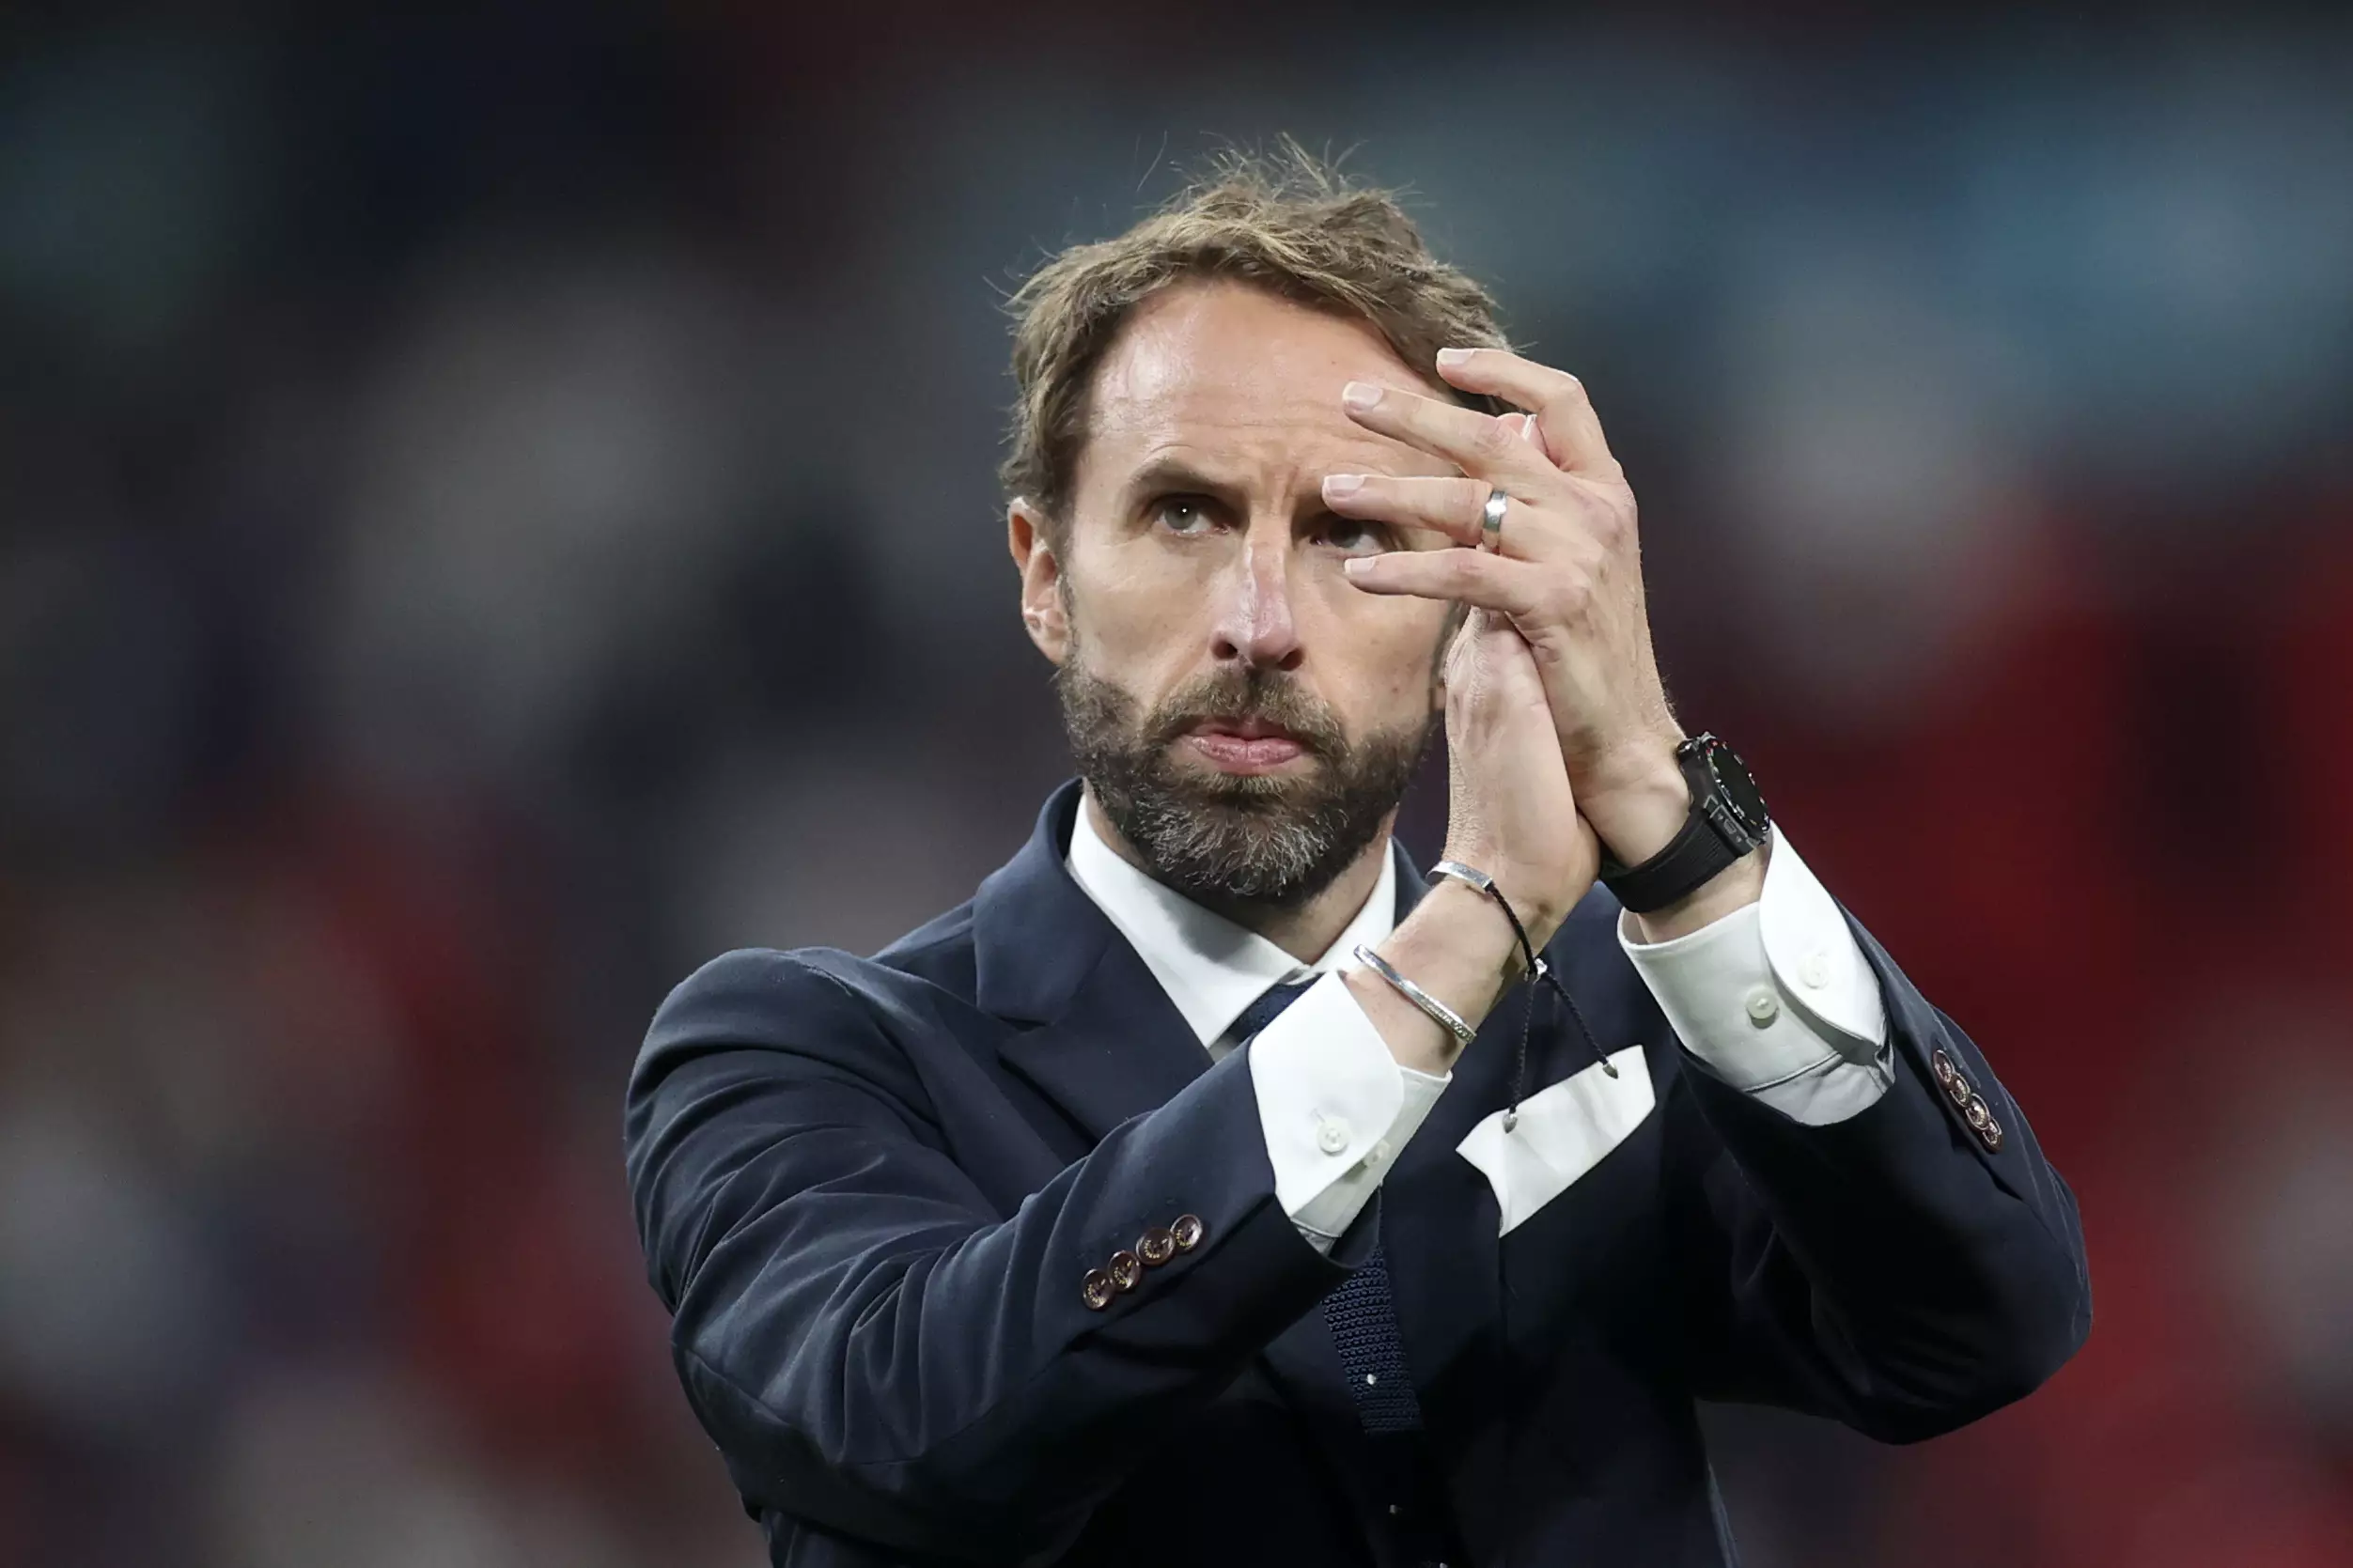 Gareth Southgate took responsibility for the defeat.